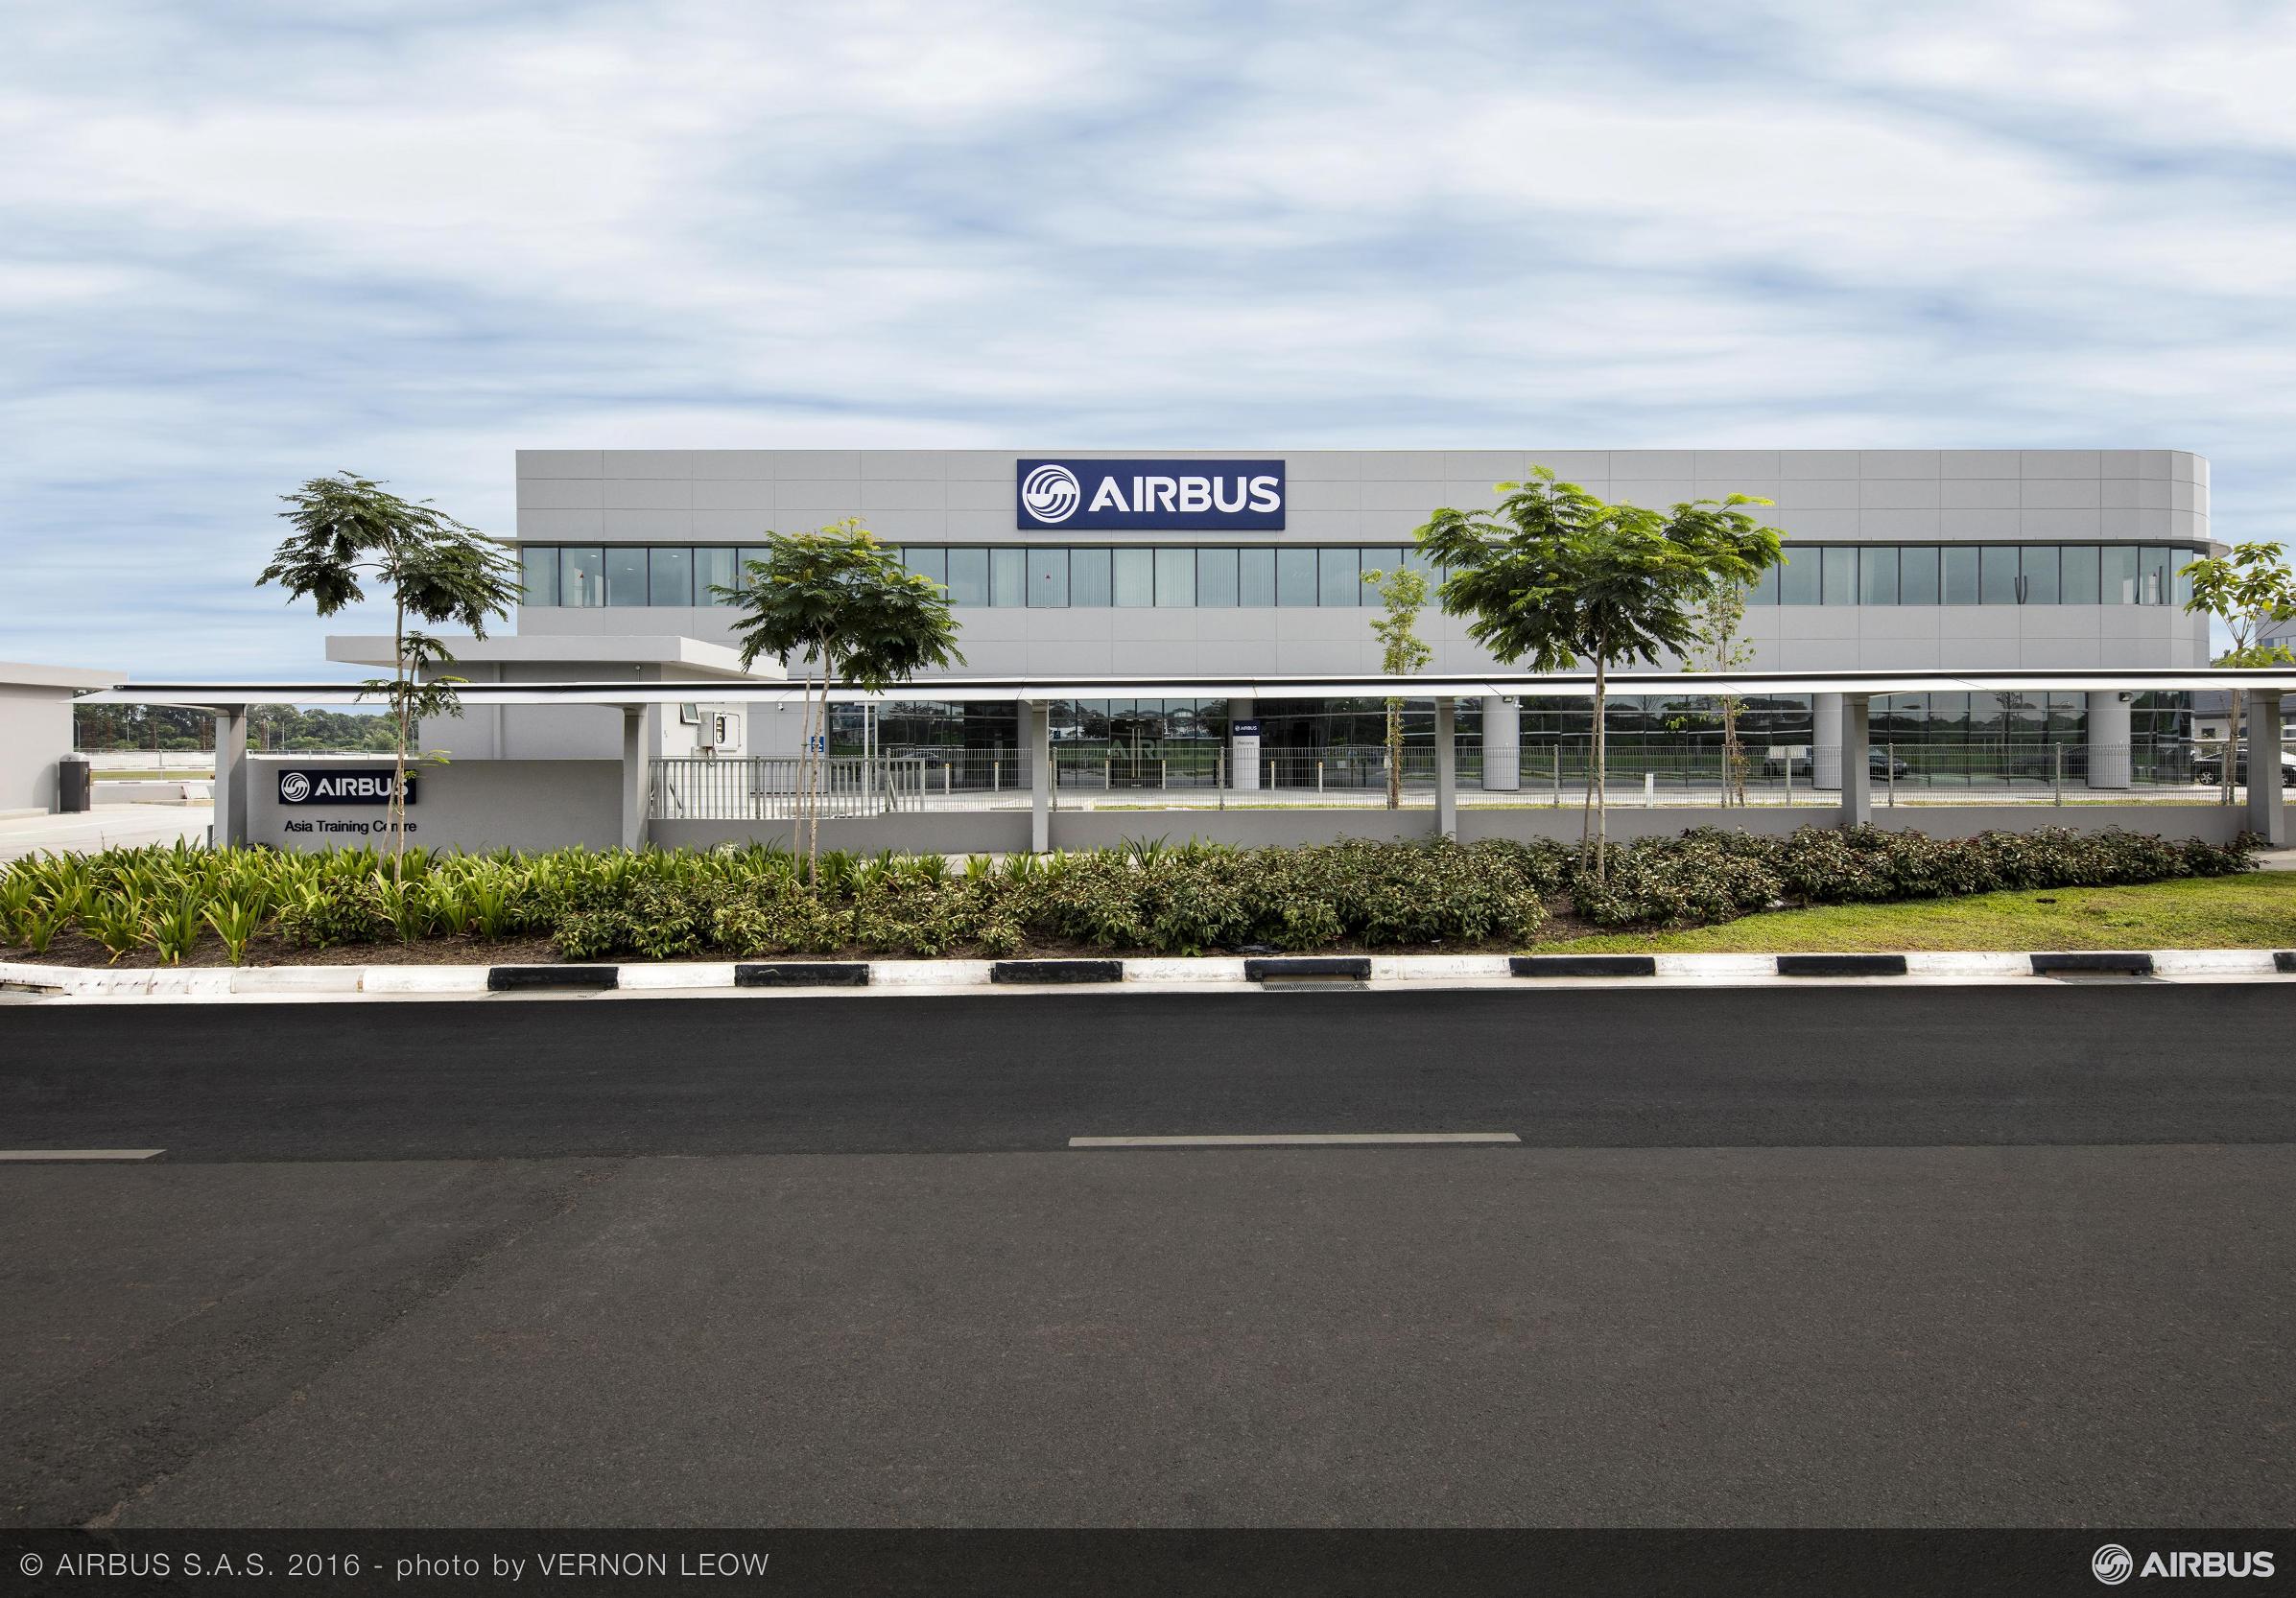 Reaching new horizons together: Airbus Asia Training Centre